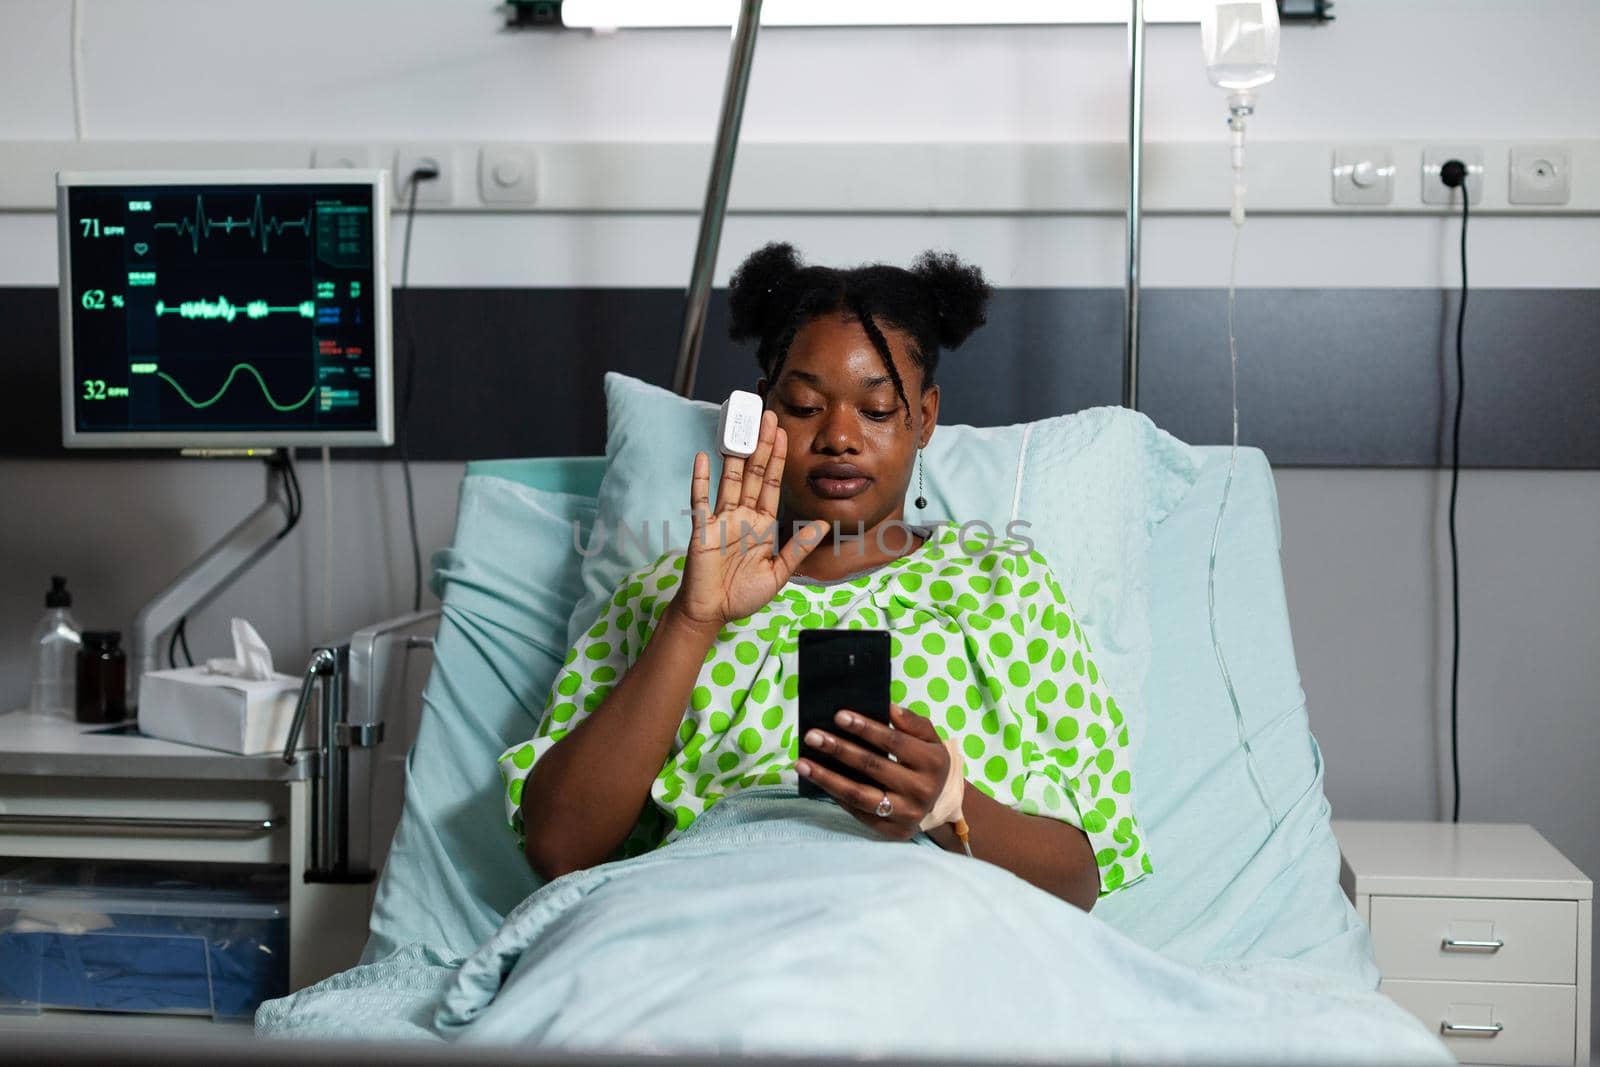 Sick african american patient using video call technology on smartphone recovering in hospital ward bed. Young person with disease waving while being on online internet conference with family